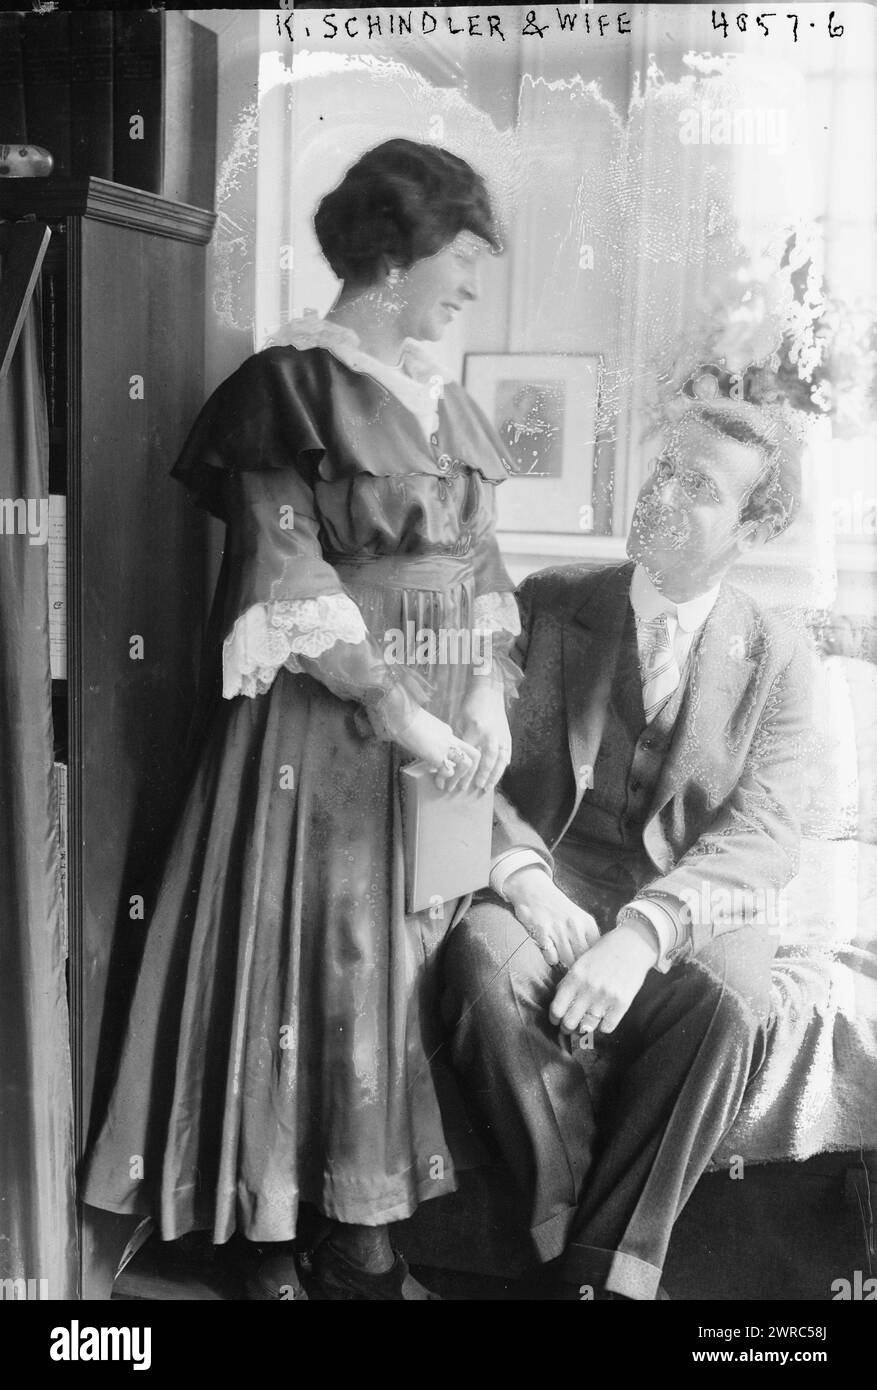 K. Schindler & wife, Photograph shows German composer and conductor Kurt Schindler with his wife actress Vera Androuchevitch., 1916 Nov. 28, Glass negatives, 1 negative: glass Stock Photo